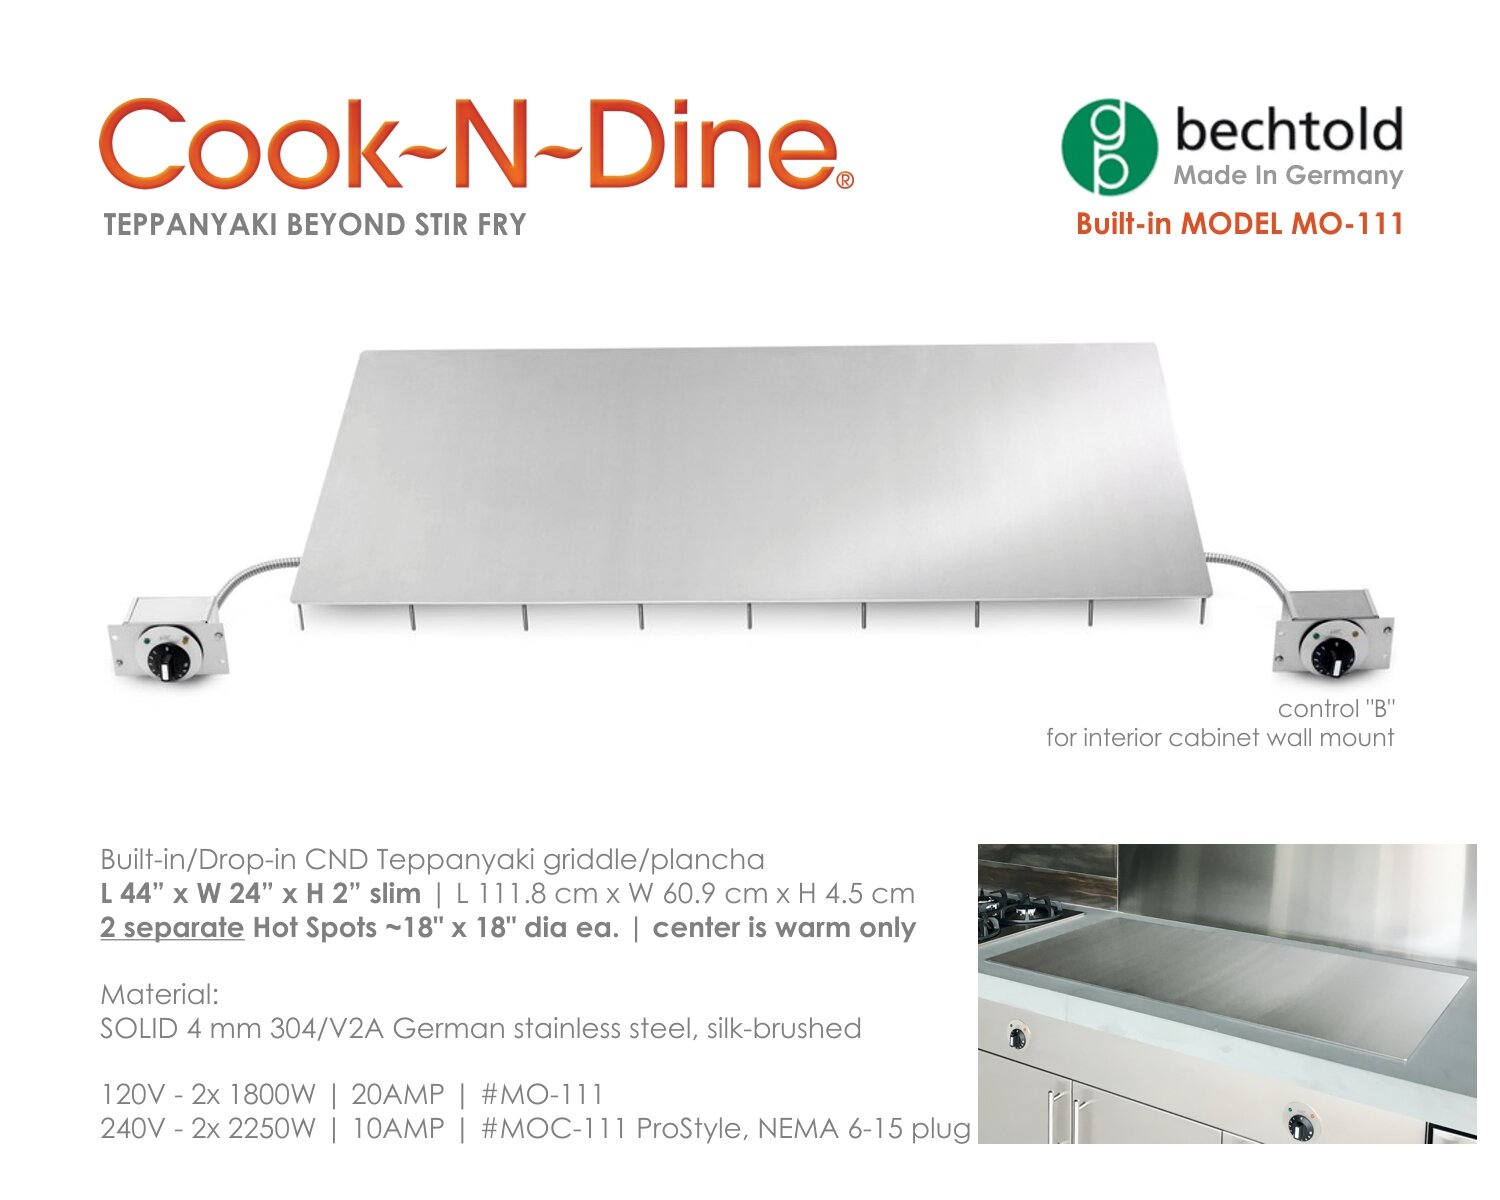 Cook-N-Dine teppanyaki grill cooktops for indoor + outdoor use, teppan  portables, tepanyaki dining tables for the home, 100% made in Germany